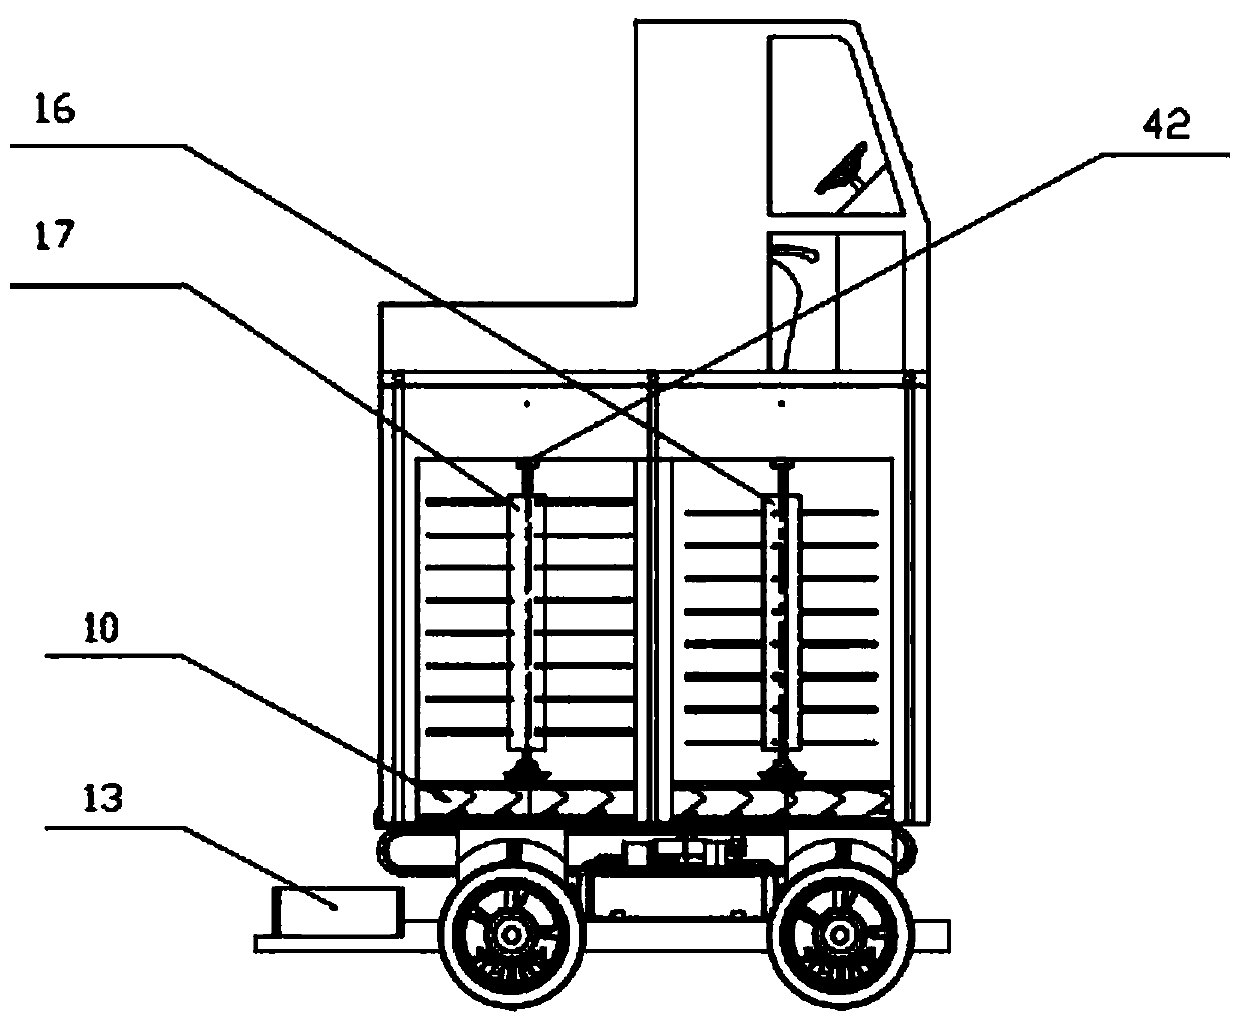 Pneumatic assisted type precise berry harvesting device and method